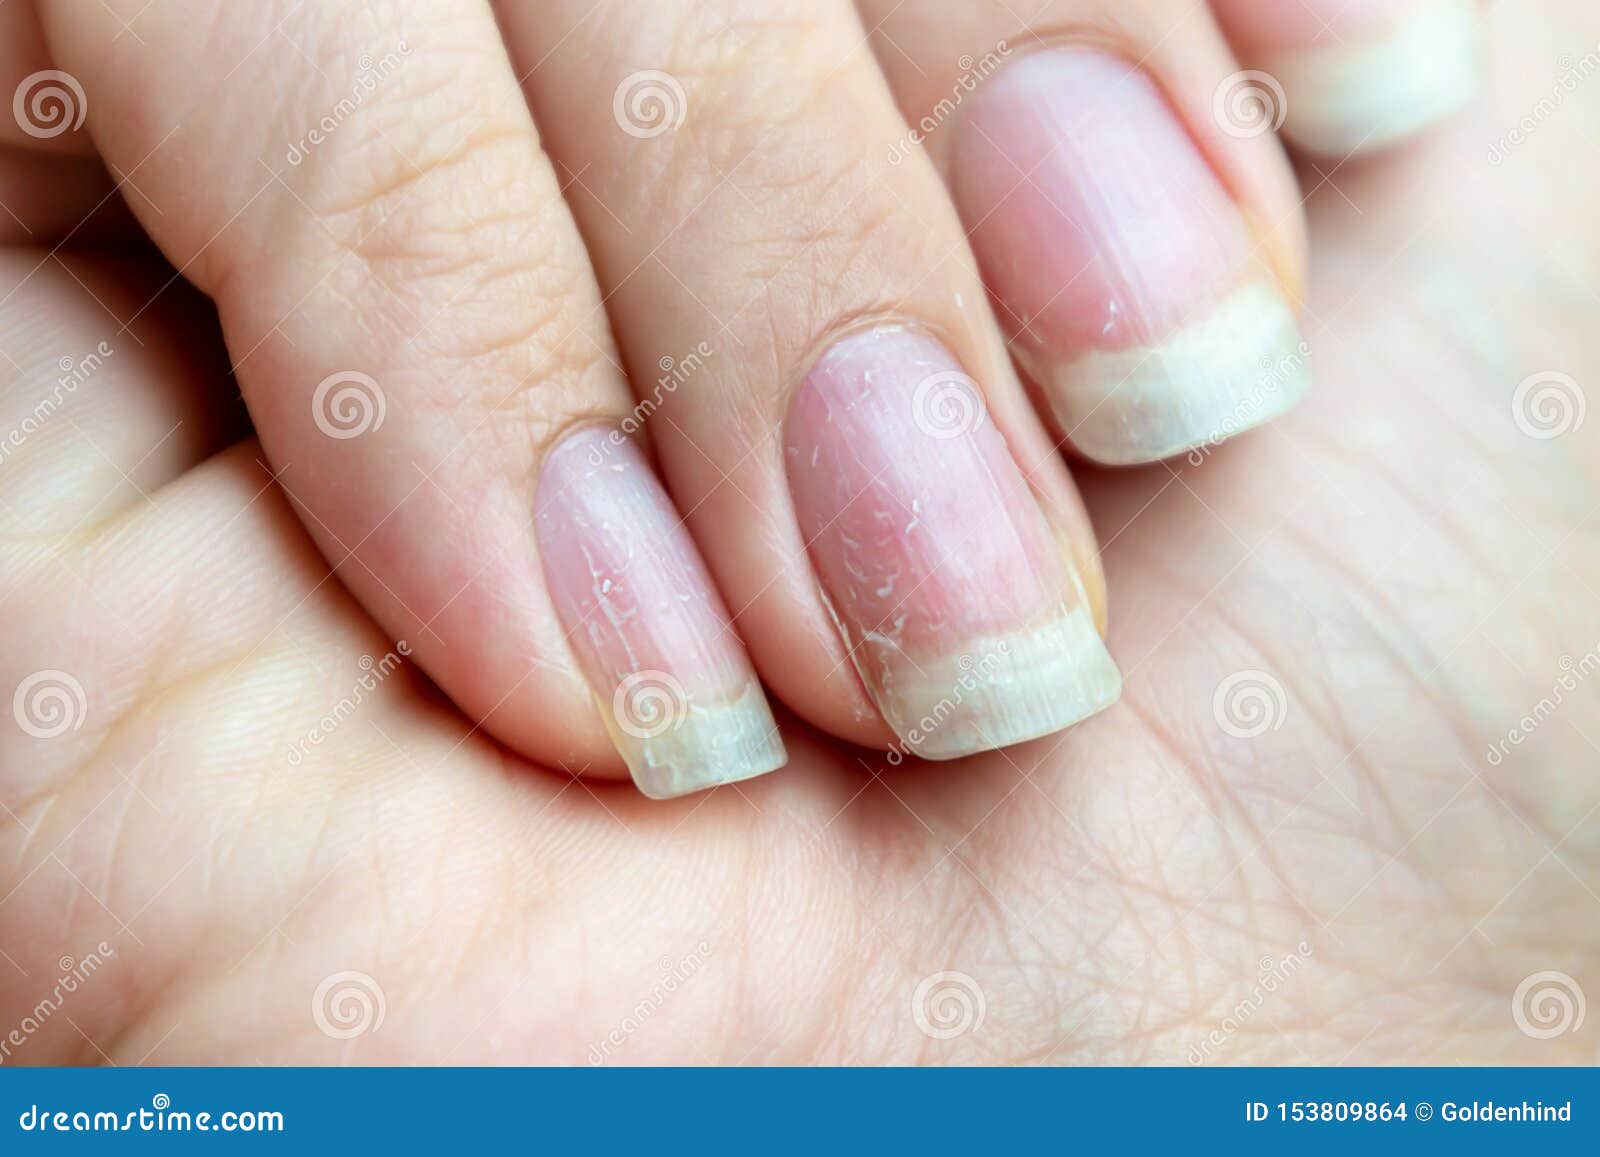 Damaged Nails that Have Problem after Doing Manicure. Health and Beauty  Problem Stock Photo - Image of disease, finger: 153809864